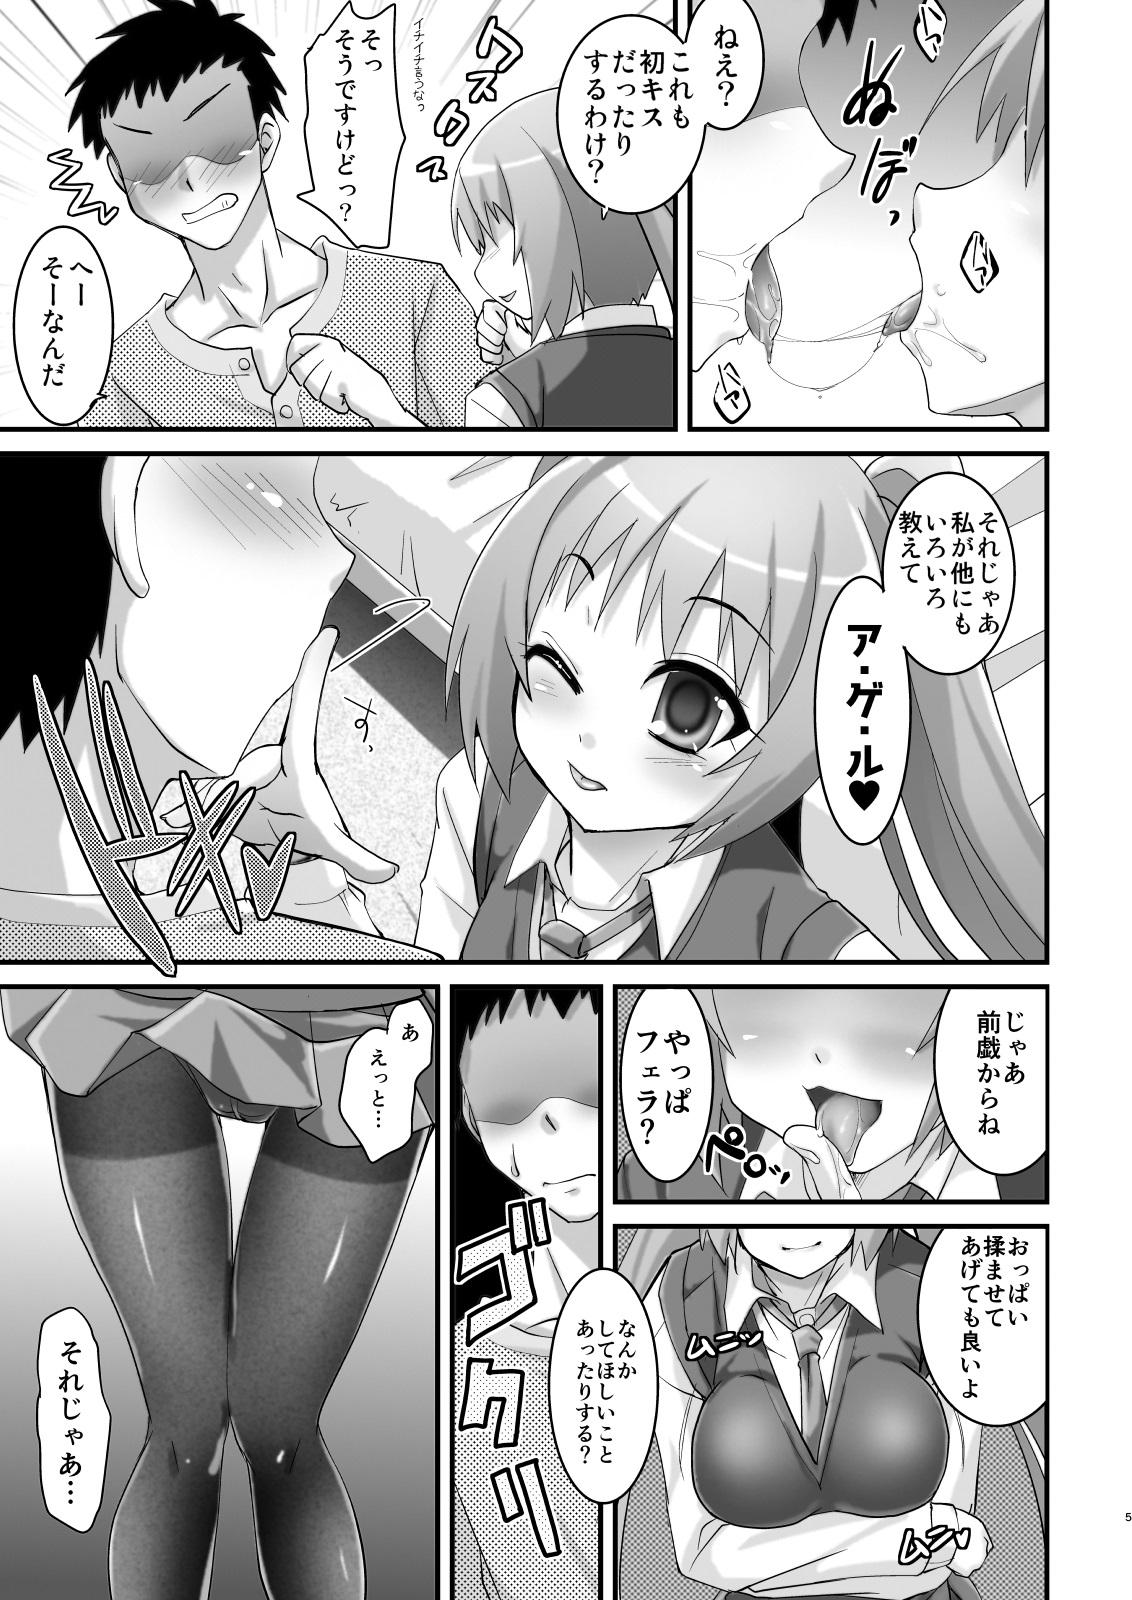 Spank Tsundere Tights to Twintails - Original Fuck For Cash - Page 5